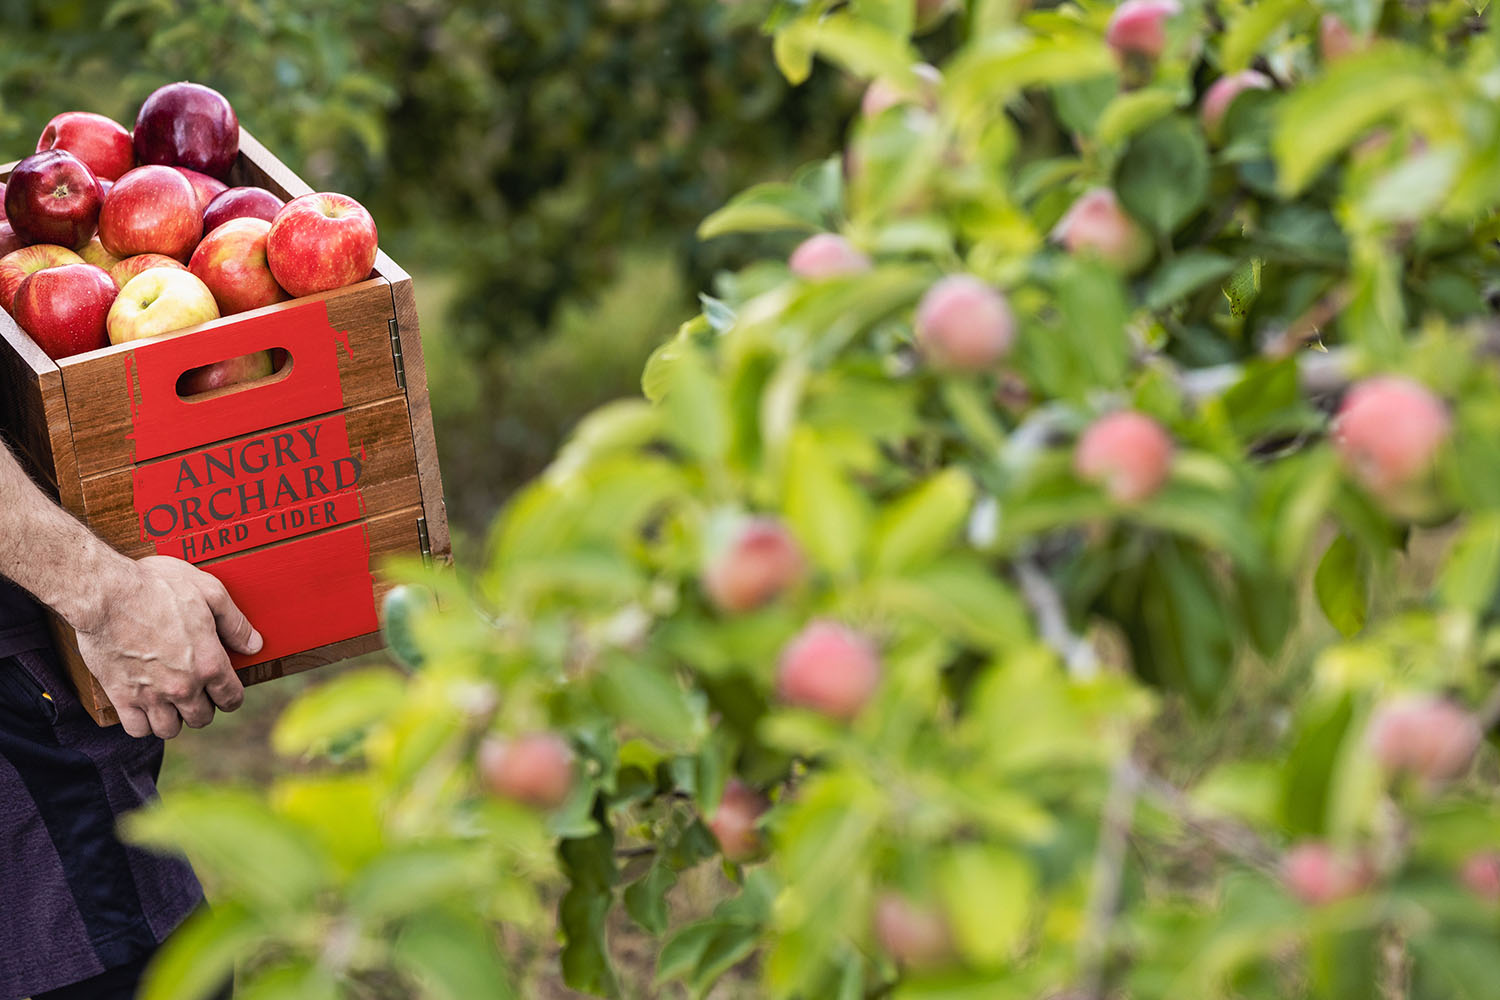 Crate of apples and apple trees